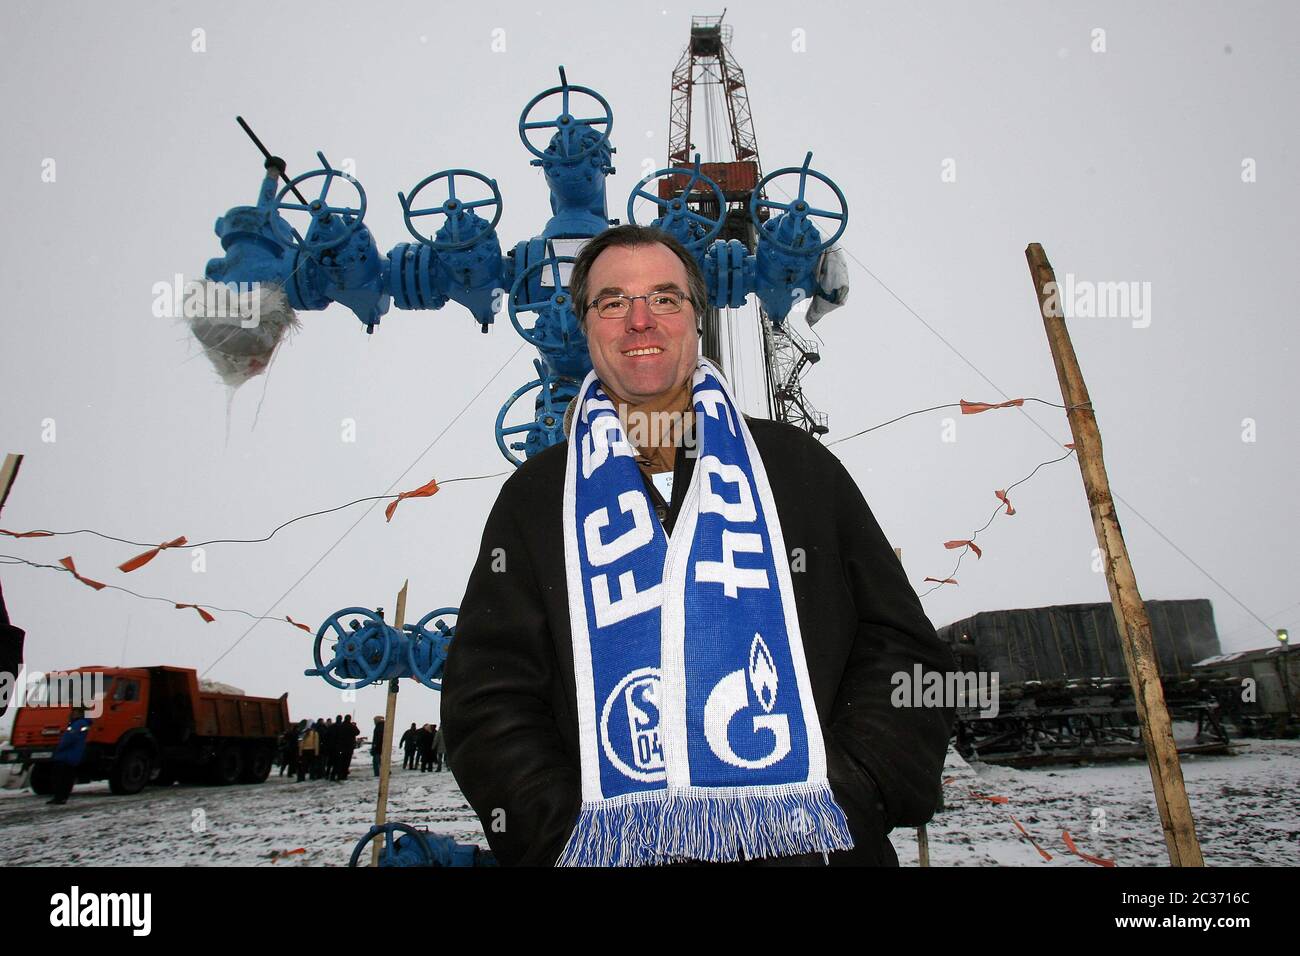 firo football: 23.03.2007 1.Bundesliga, season 2006/2007 Russia, Russia trip FC Schalke o4 trip at the invitation of sponsor GAZPROM to Moscow, Siberia, St. Petersburg Clemens TONNIES in front of borehole no. 922, Bohrturm, JAMBURG our general terms and conditions apply, can be viewed at www.firosportphoto.de copyright by firo sportphoto: Pfefferackerstr. 2a 45894 Gelsenkirchen www.firosportphoto.de mail@firosportphoto.de (Volksbank Bochum-Witten) Bank code: 430 601 29 Kt.Nr .: 341 117 100 Tel: 0209 - 9304402 Fax: 0209 - 9304443 | usage worldwide Stock Photo